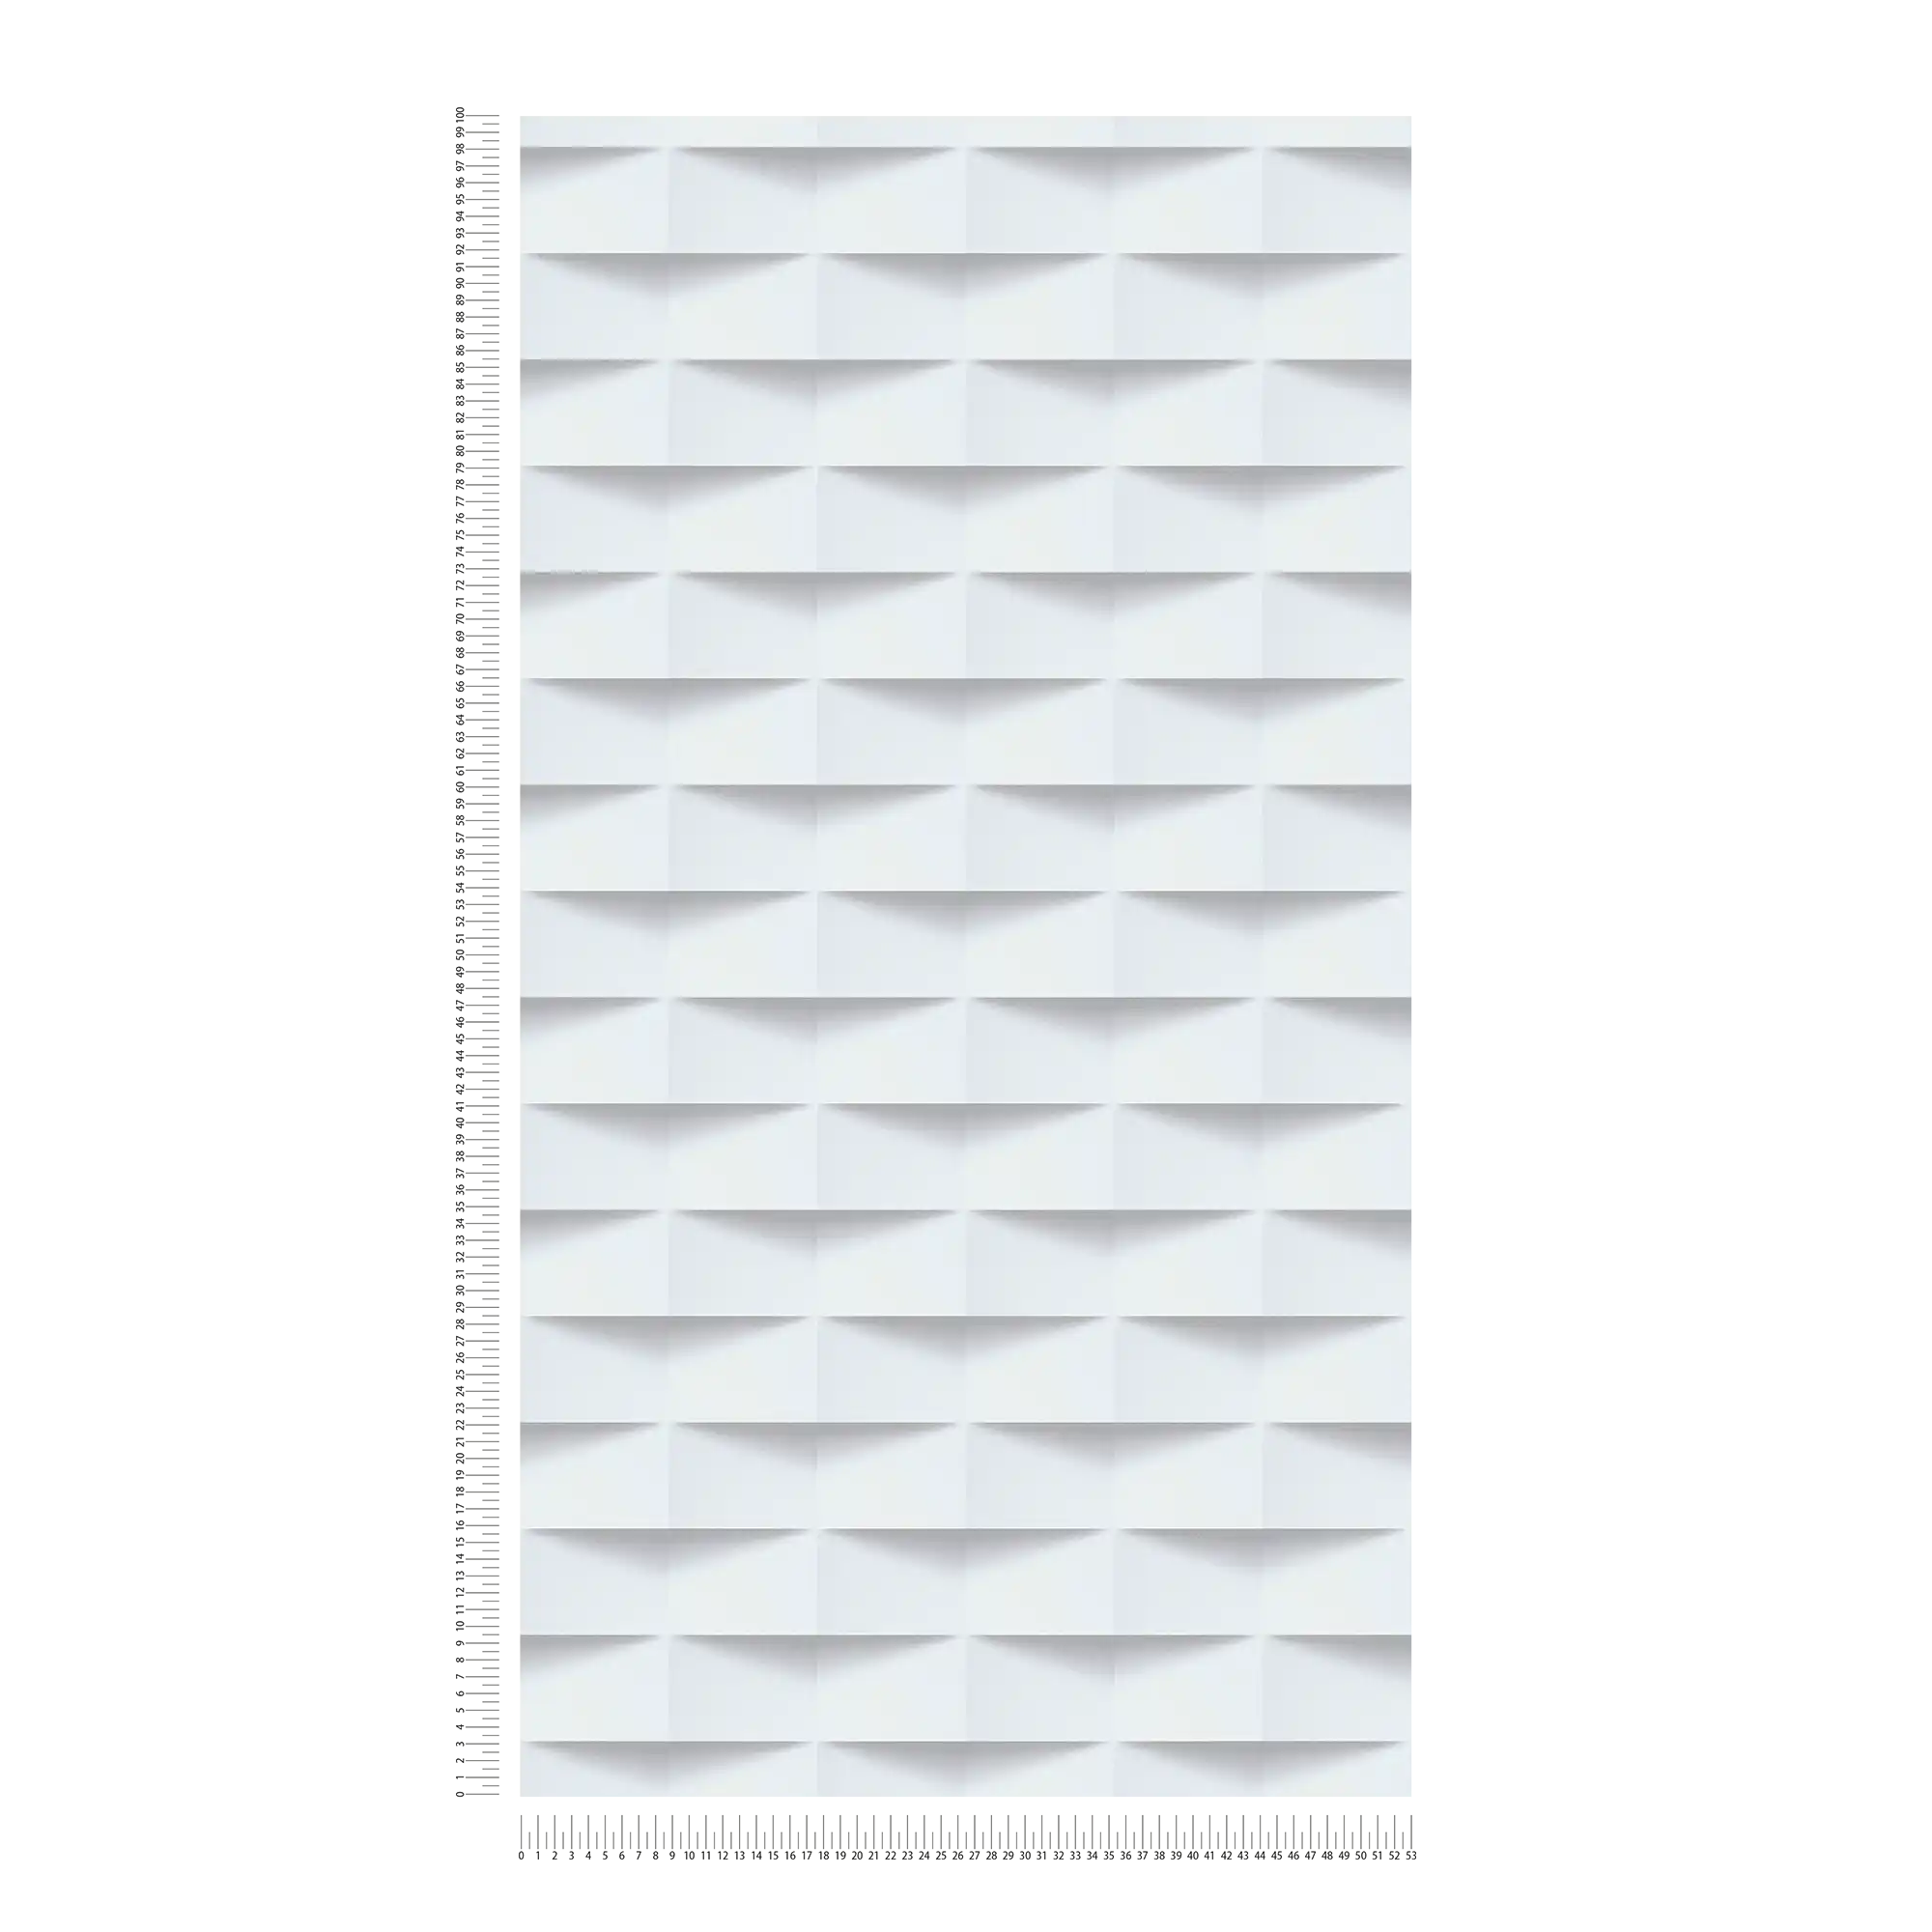             Self-adhesive wallpaper 3D look with graphic pattern - white
        